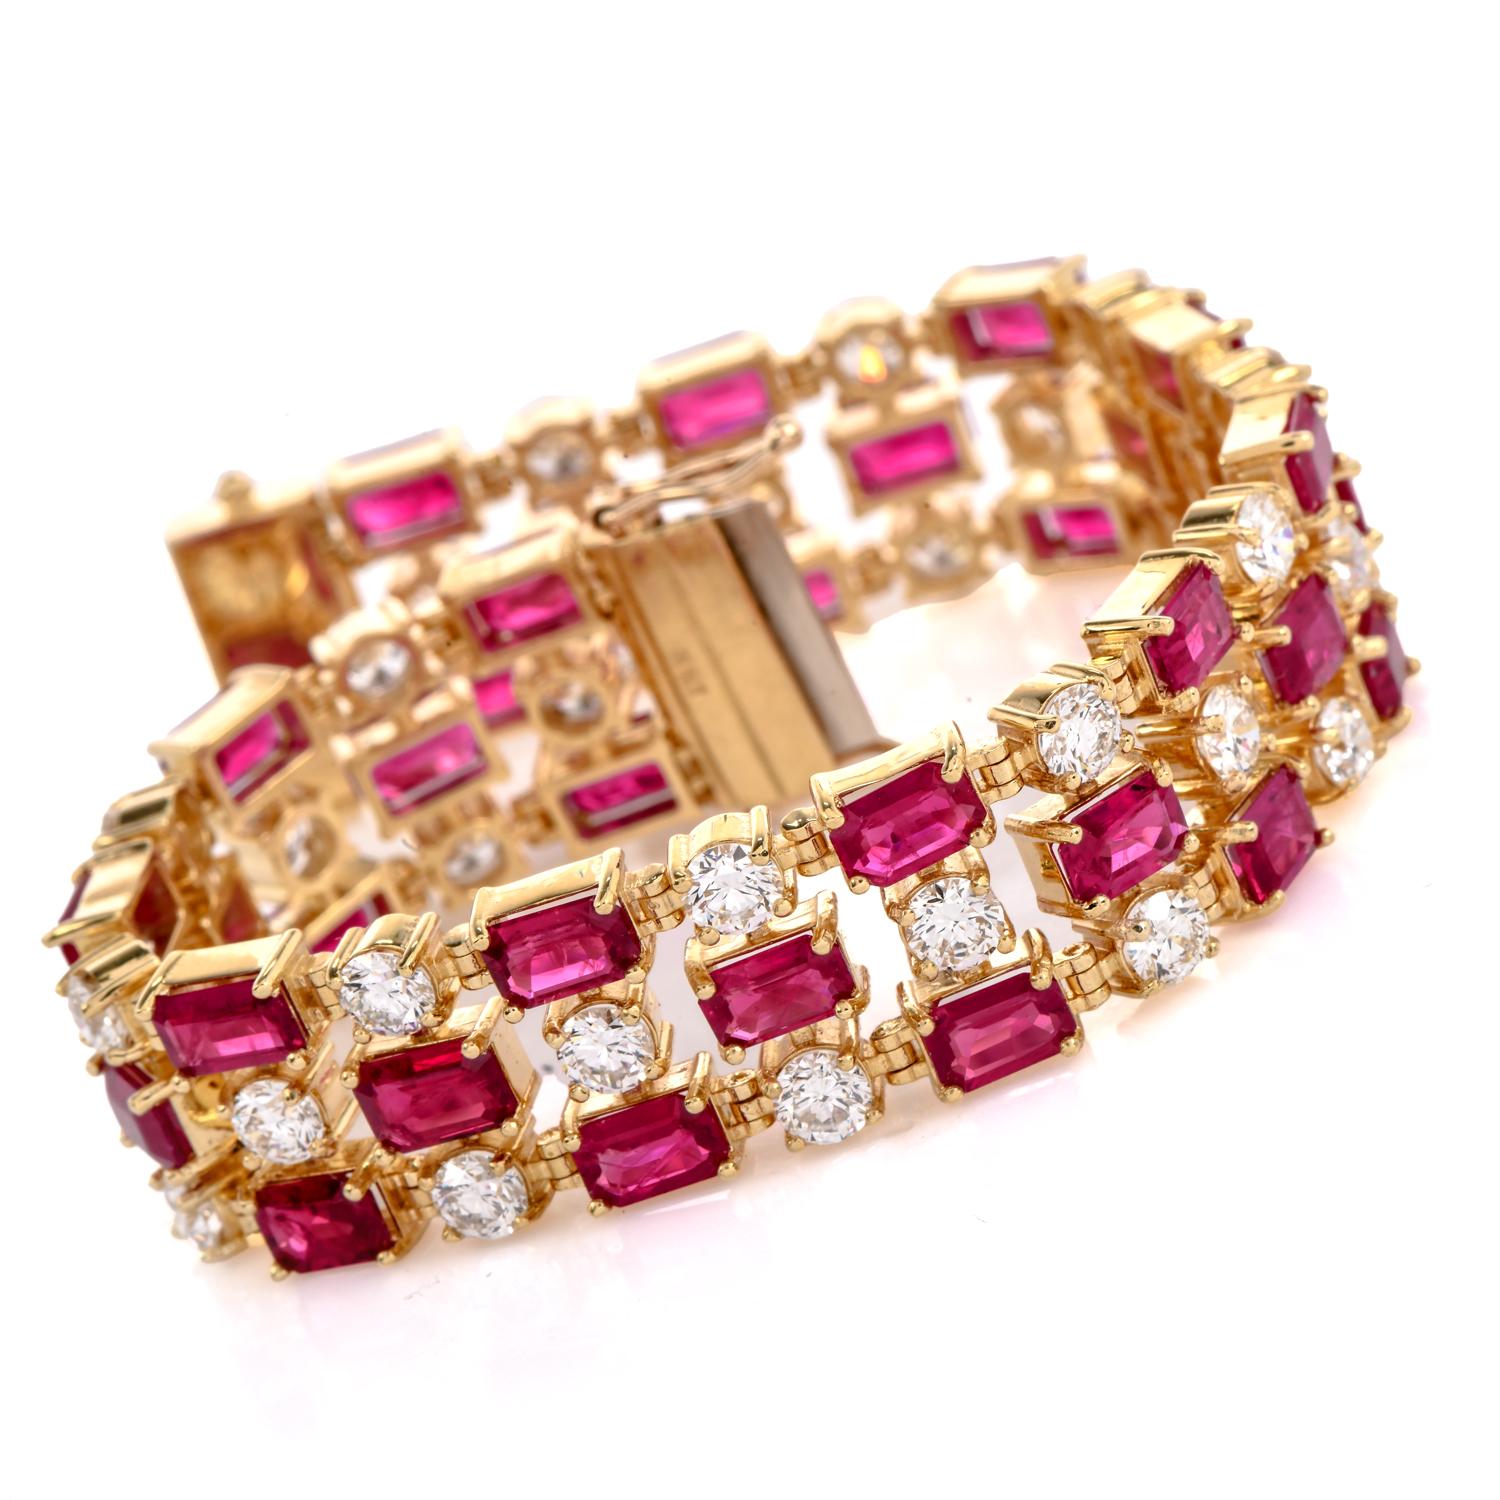 Adorn your wrist with the epitome of luxury: a certified AGL Burma Ruby and Diamond Tennis captivating three-row tennis Bracelet.

This 6.75-inch, 14 mm wide bracelet Has an elegant design, featuring three rows of flexible links showcasing 36